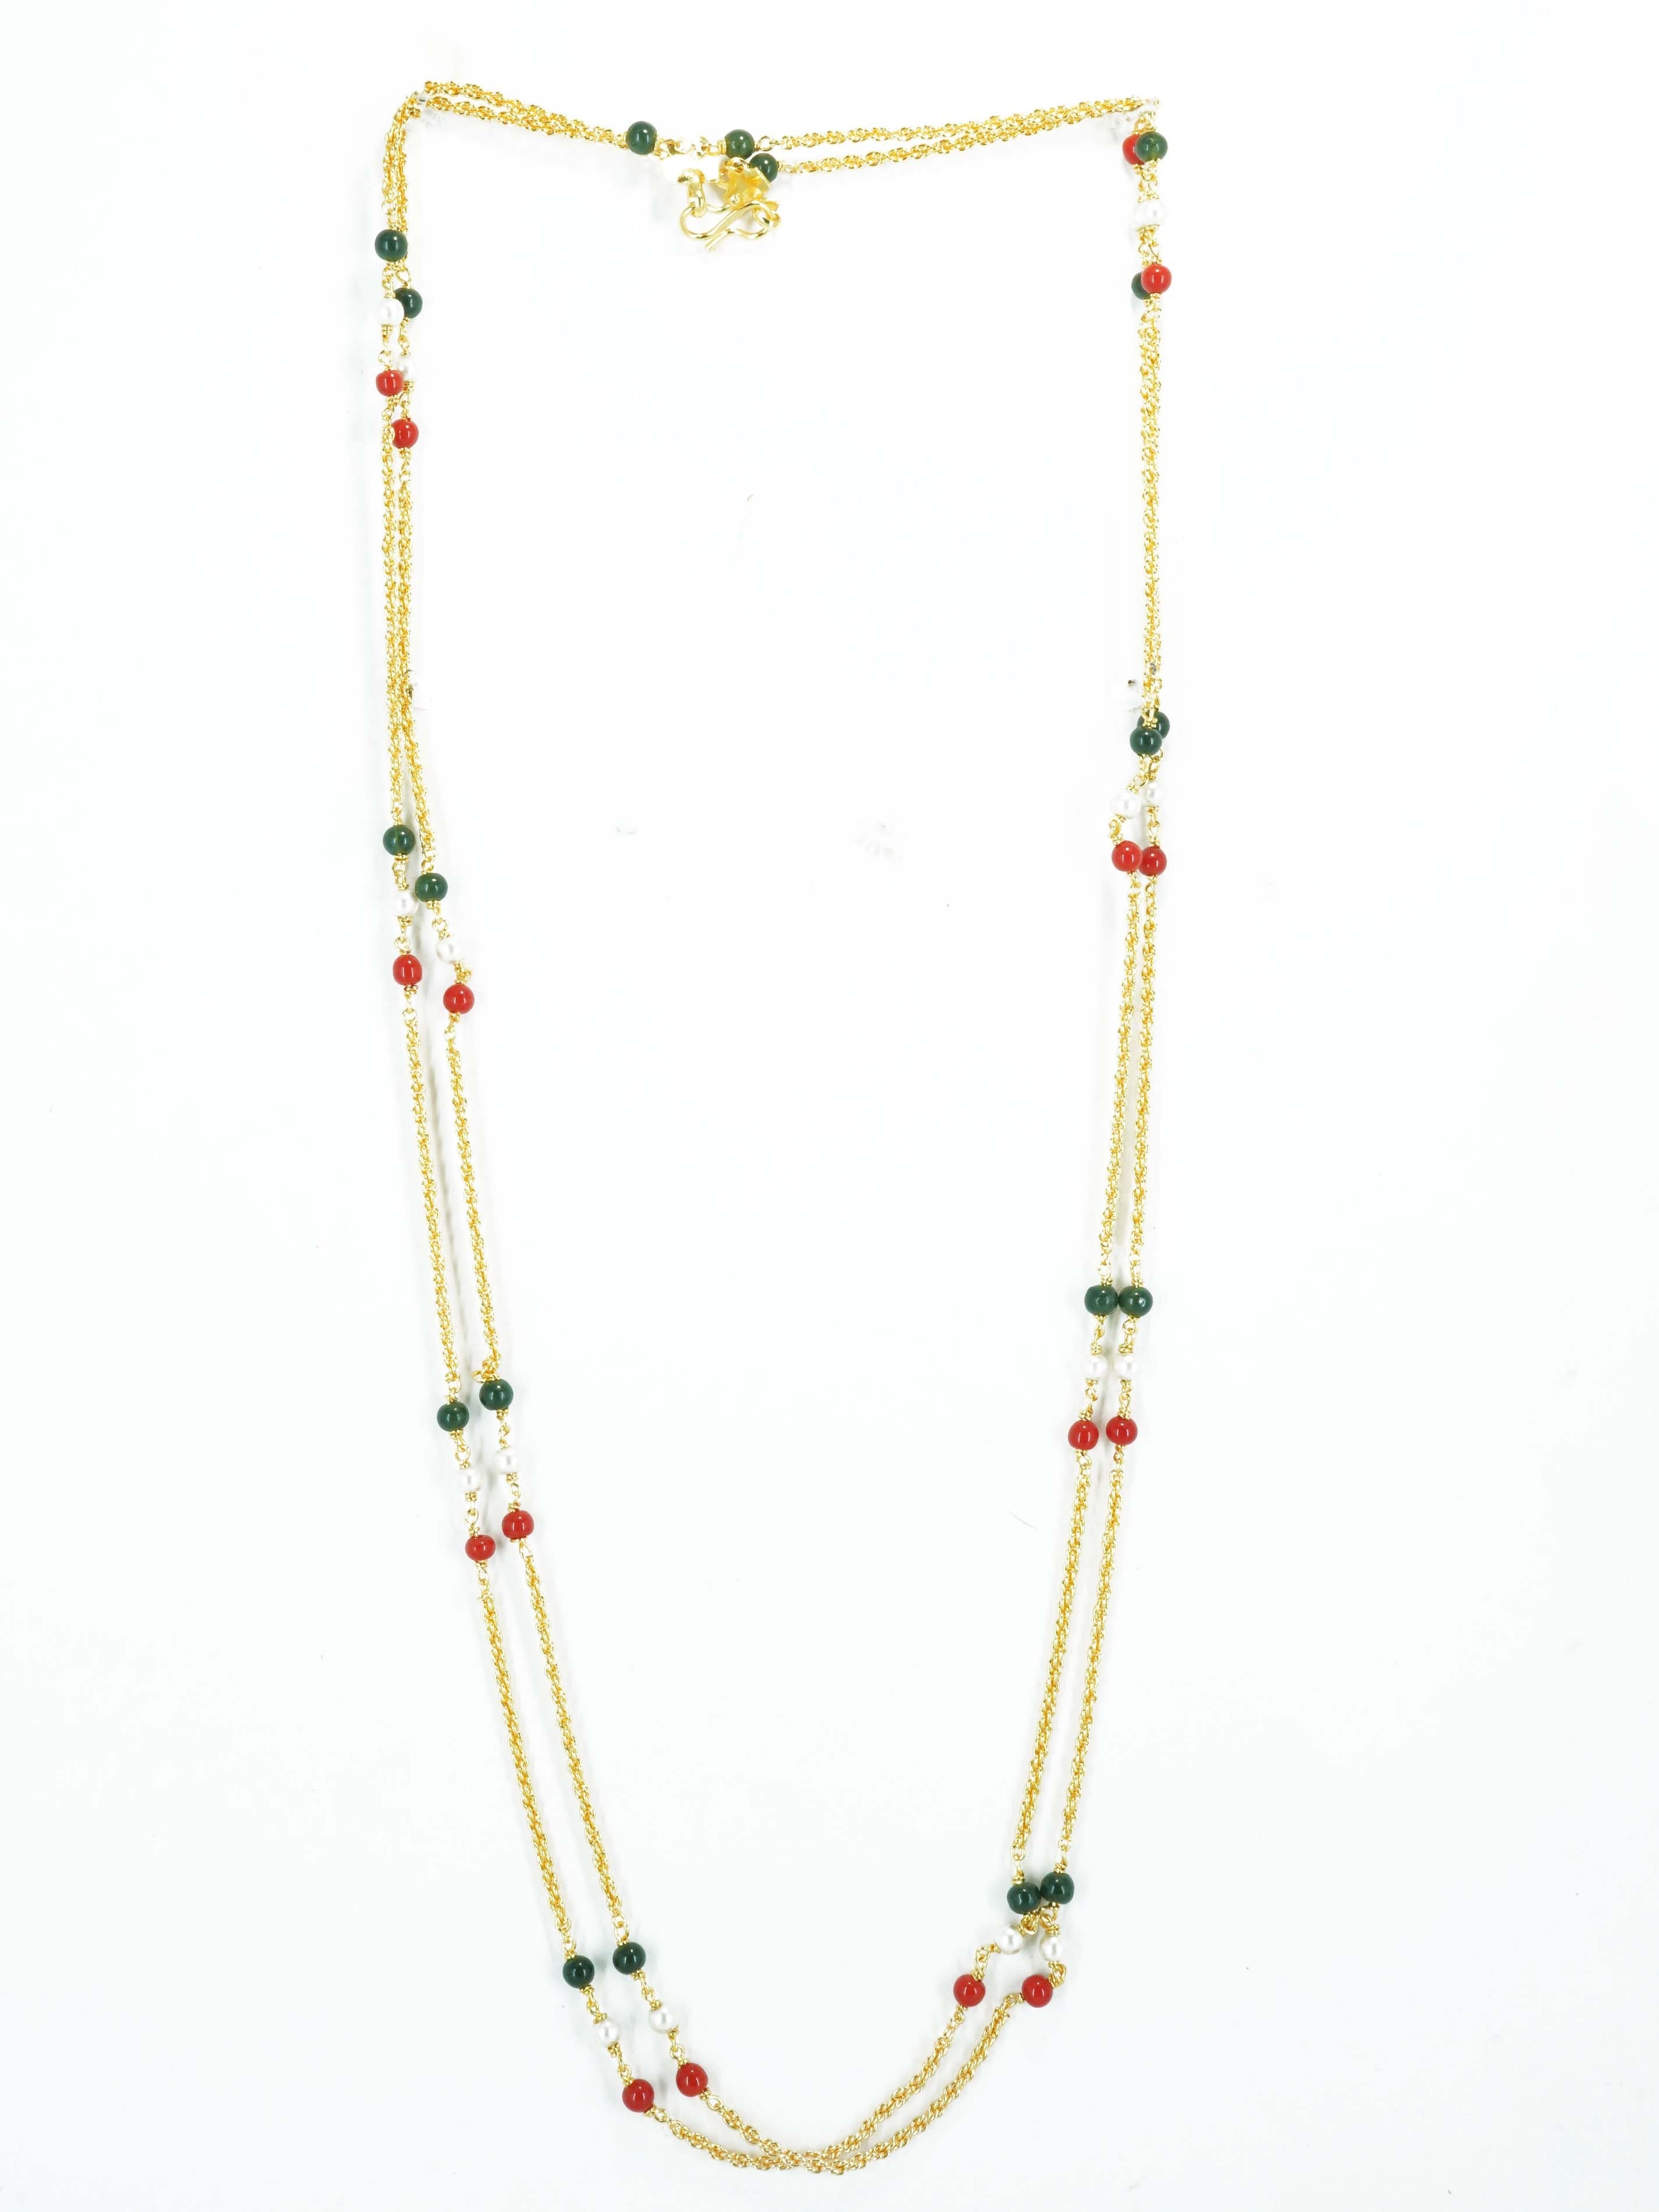 1 gm Micro gold plated 2 Line designer 30 inches chain with Multicolor beads 10652N